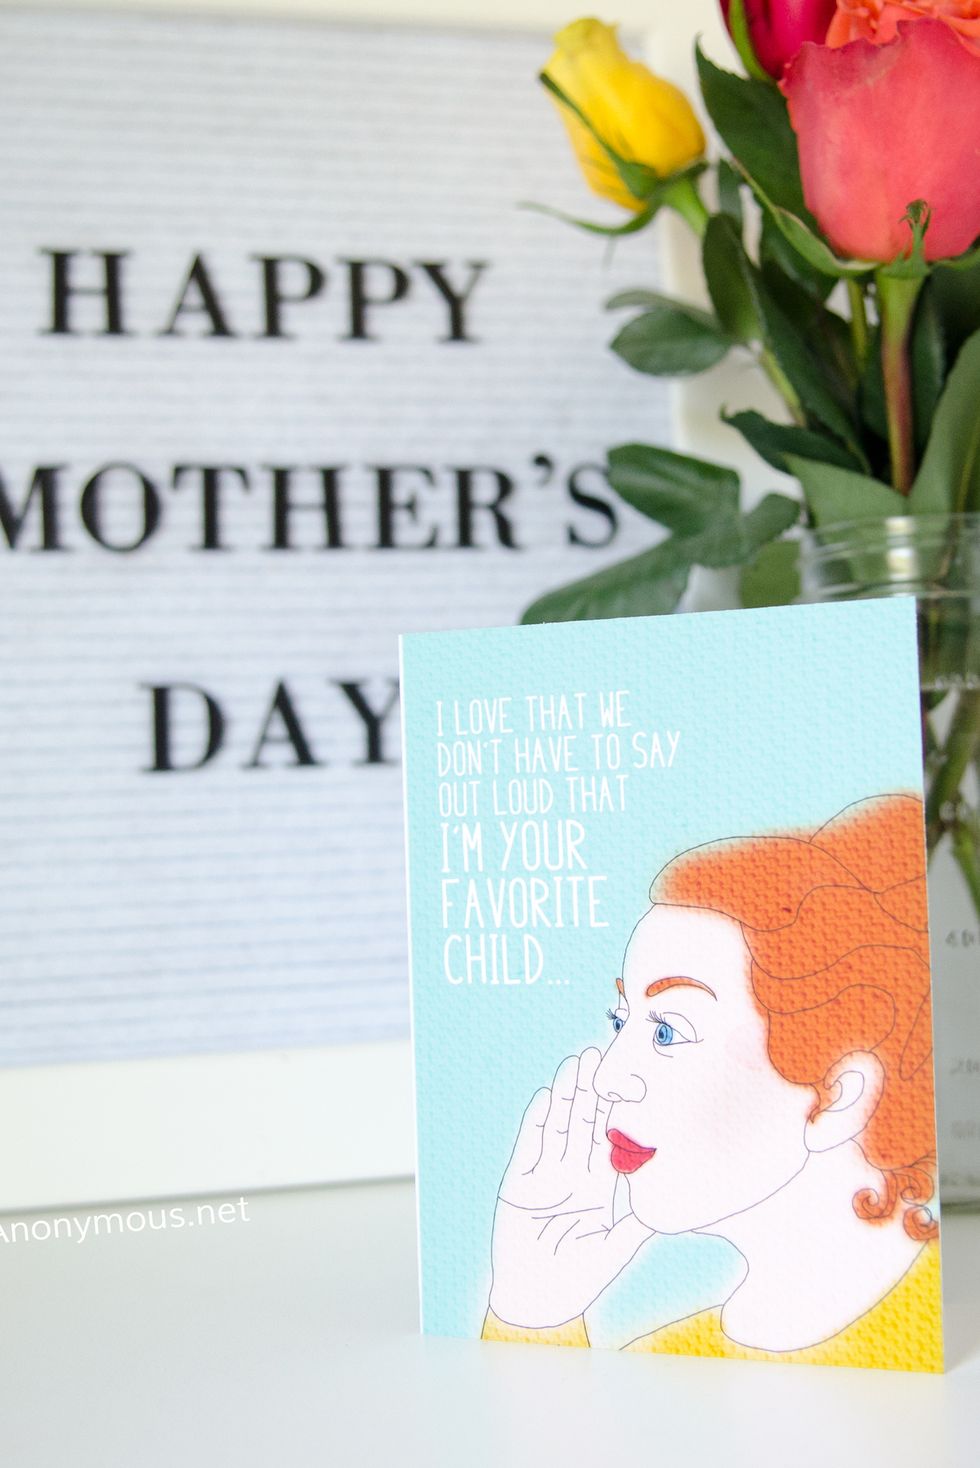 55 Best Mother's Day Crafts for Kids - DIY Mother's Day Gifts